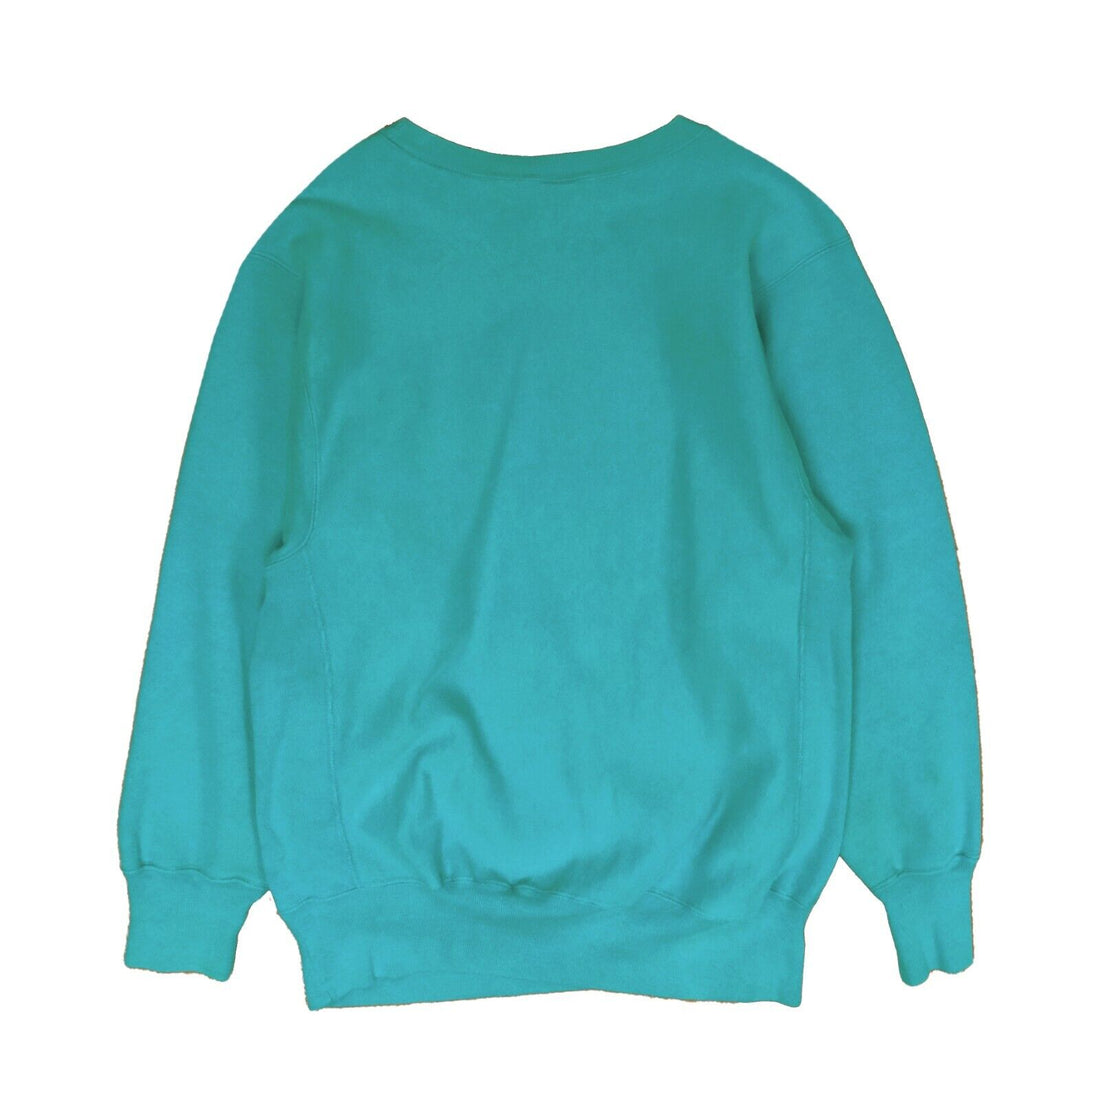 Vintage Champion Reverse Weave Sweatshirt Size XL Teal 90s Embroidered